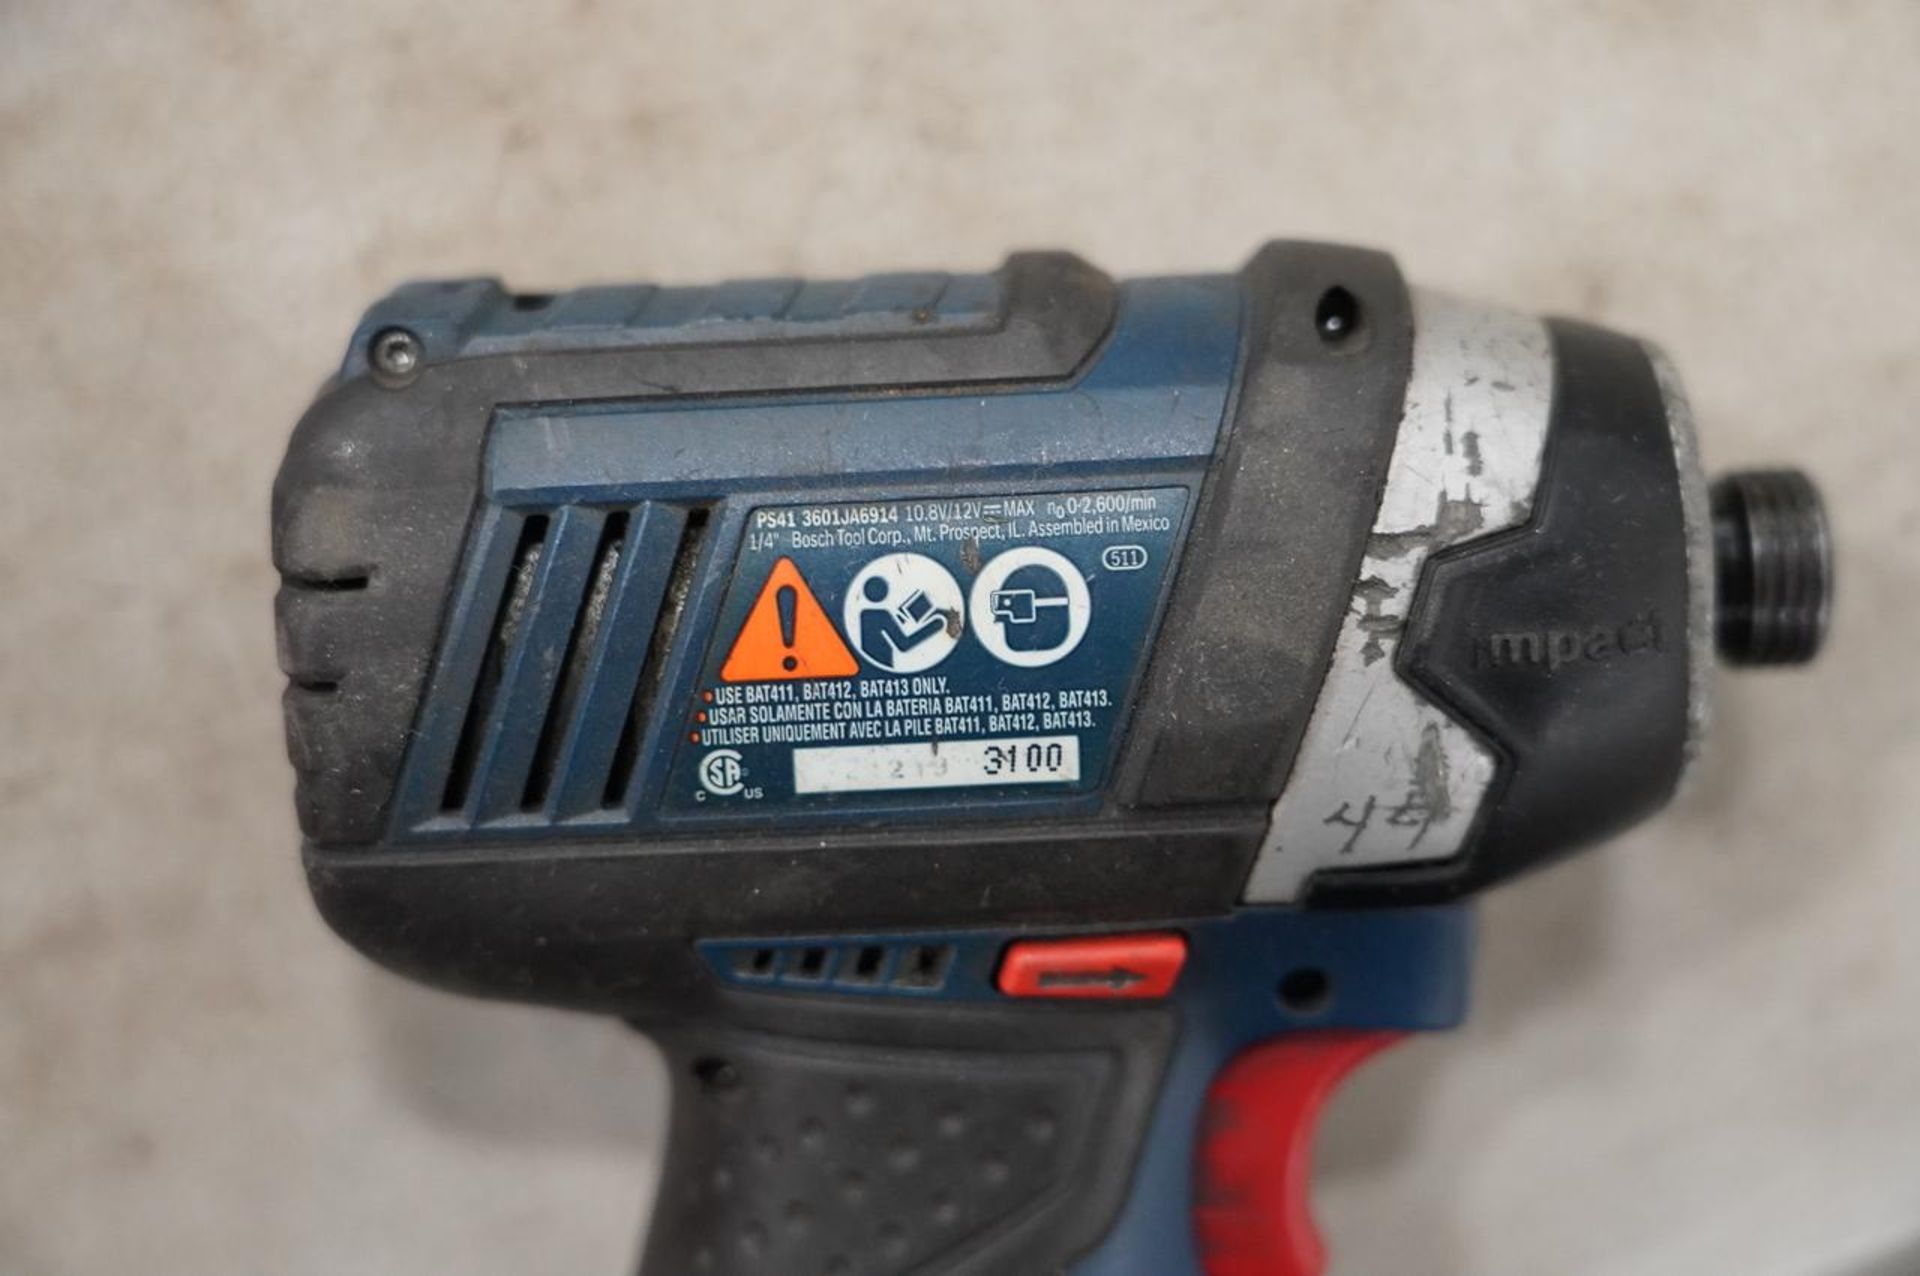 Bosch (3) 1/4'' Cordless Impact Drivers and (1) Flashlight - Image 5 of 5